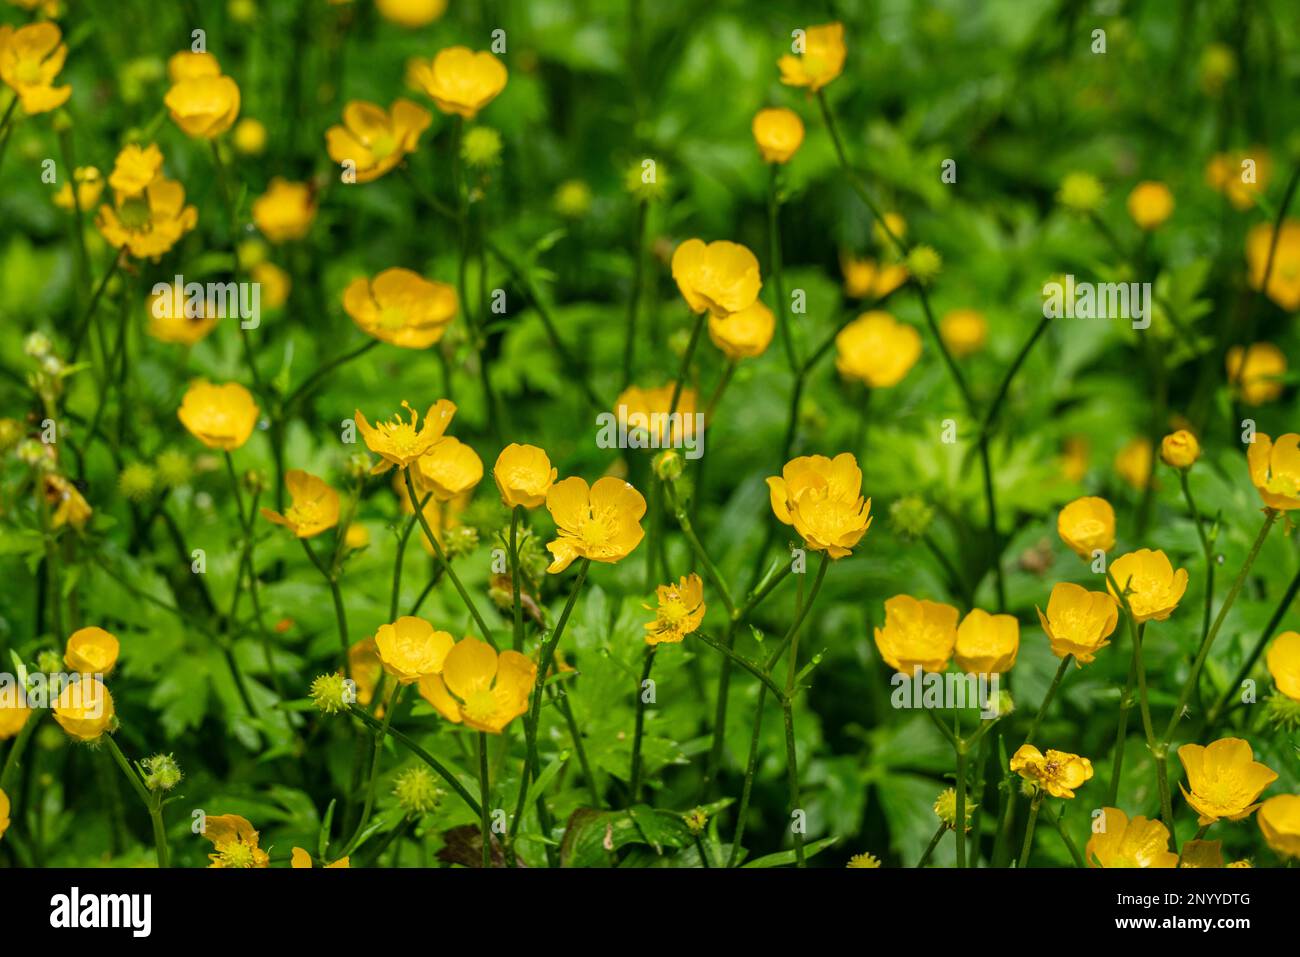 Full frame shot of a cluster of flowering buttercup plants (Ranunculus acris) in spring, forming a beautiful natural background image Stock Photo